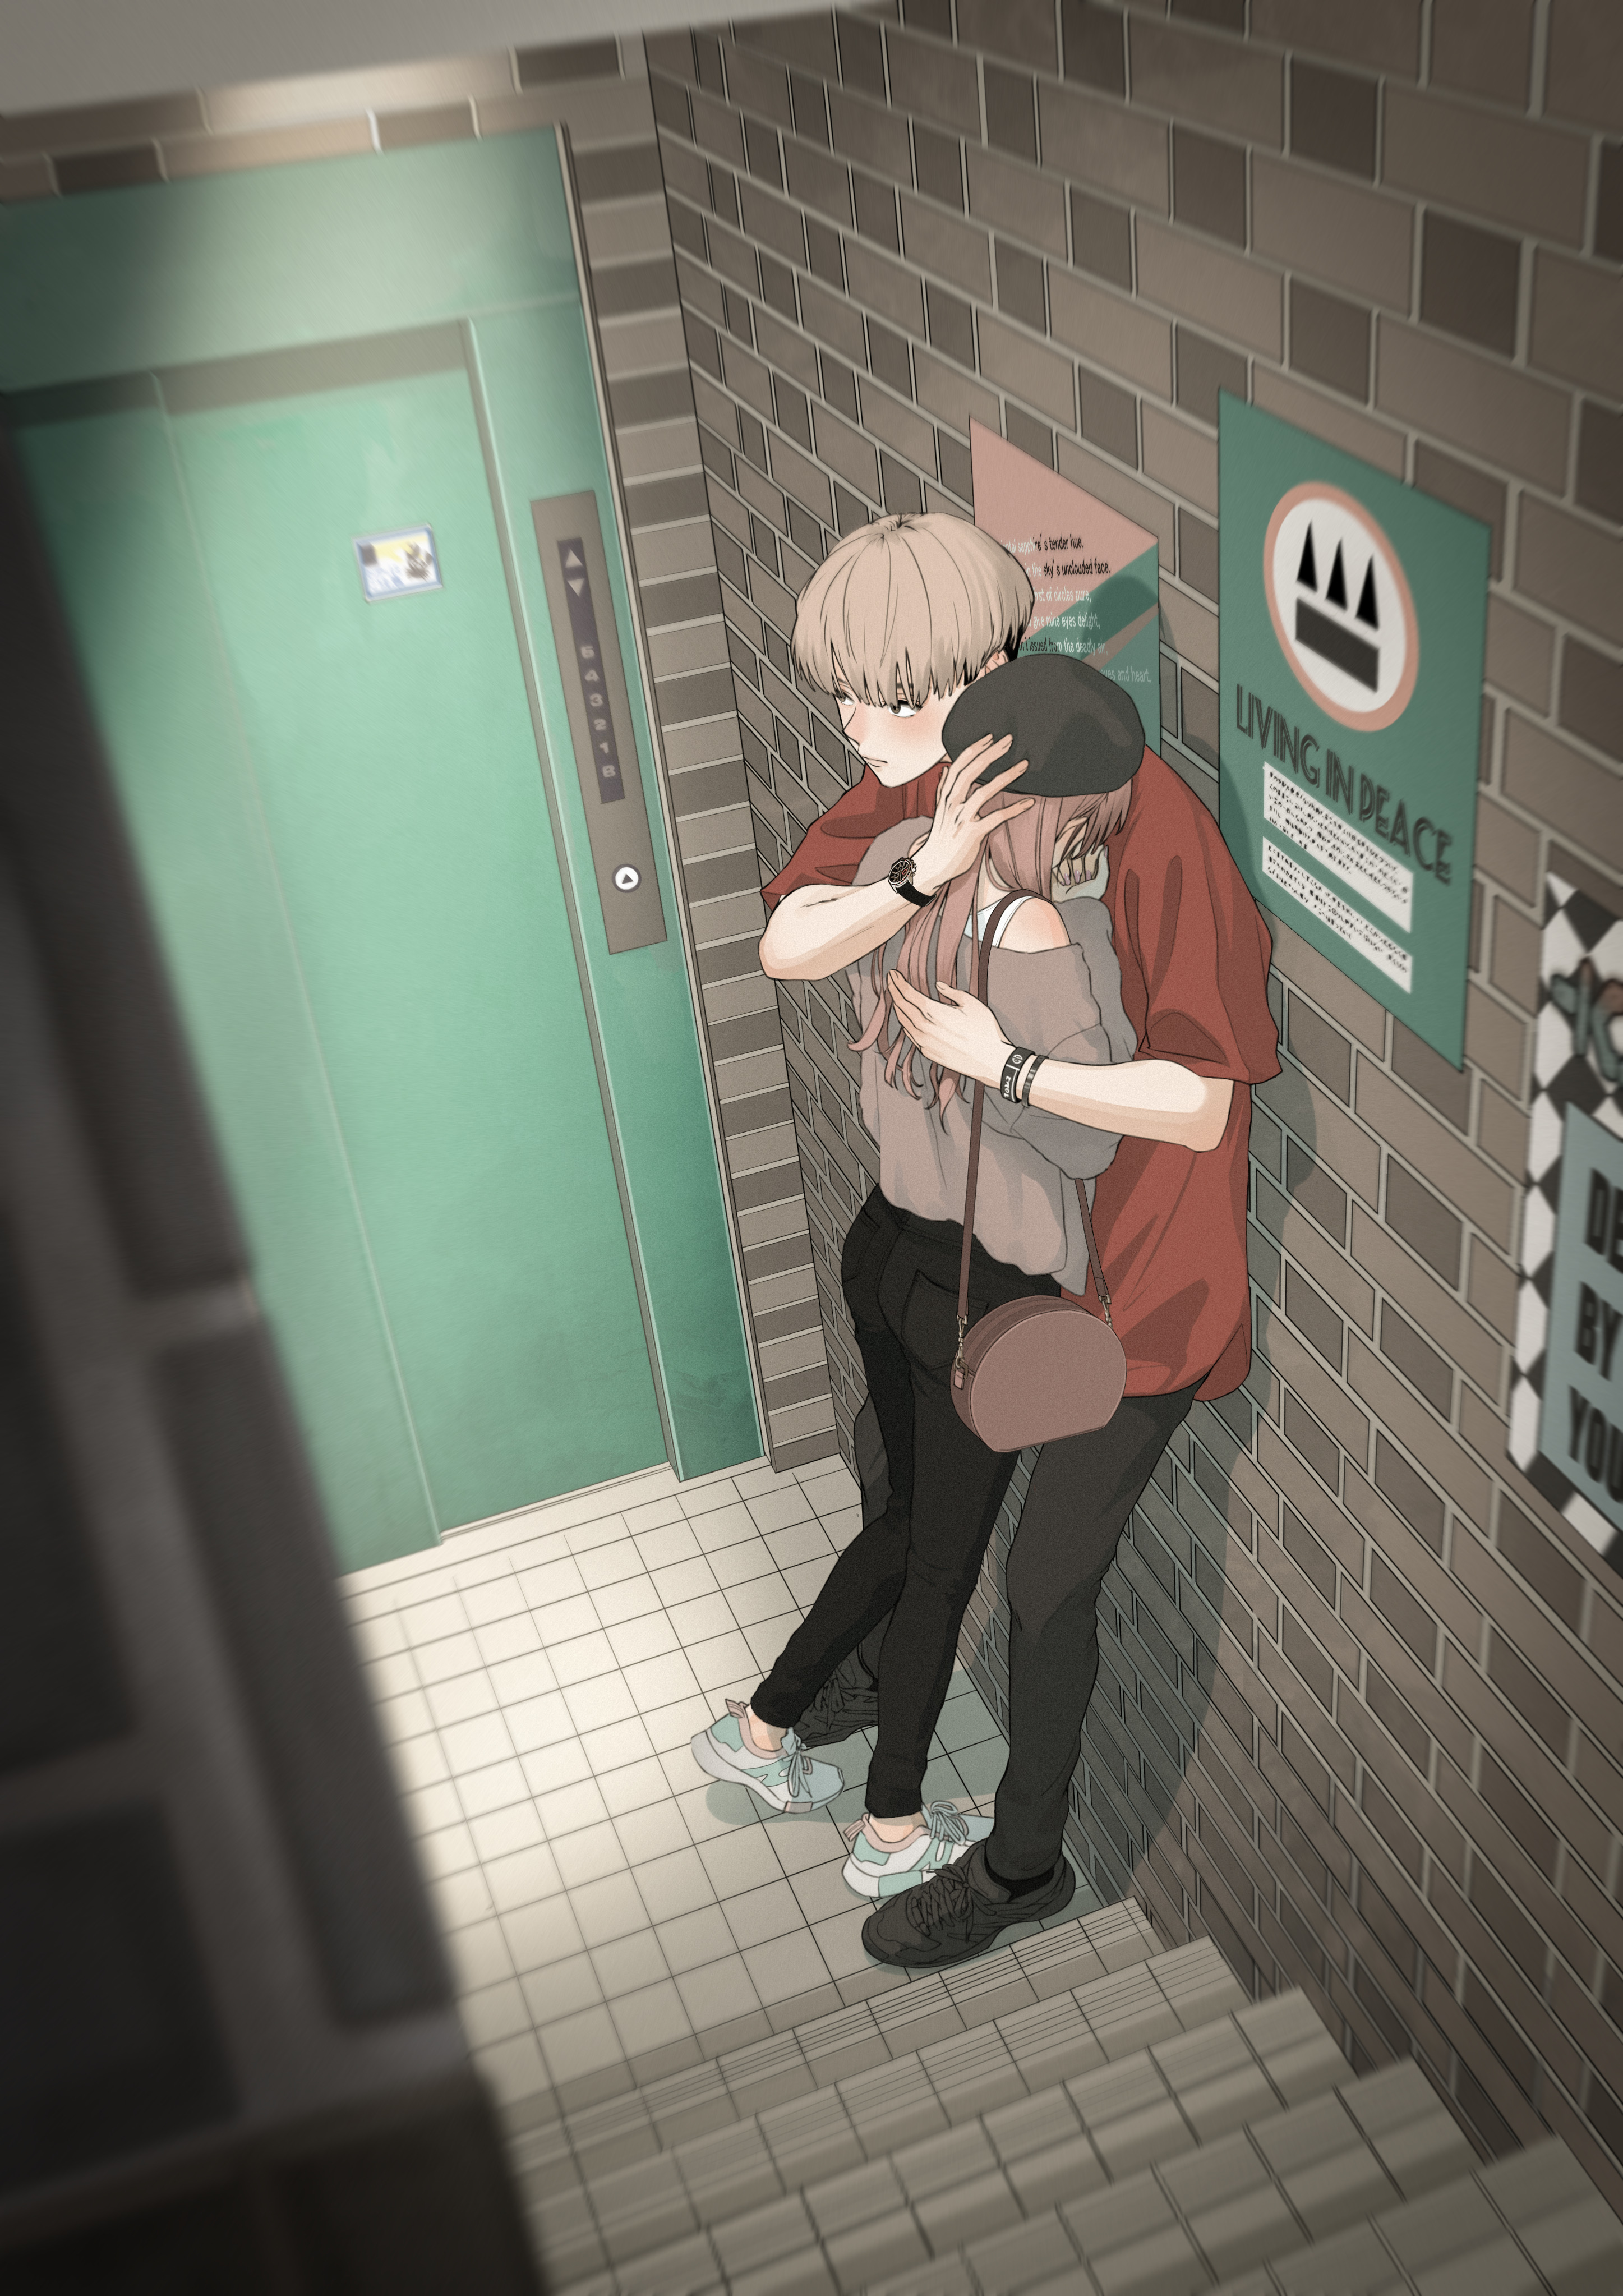 Anime 2894x4093 anime boys anime girls anime couple women long hair standing stairs elevator hat hugging purse shoes portrait display blushing watch bracelets poster